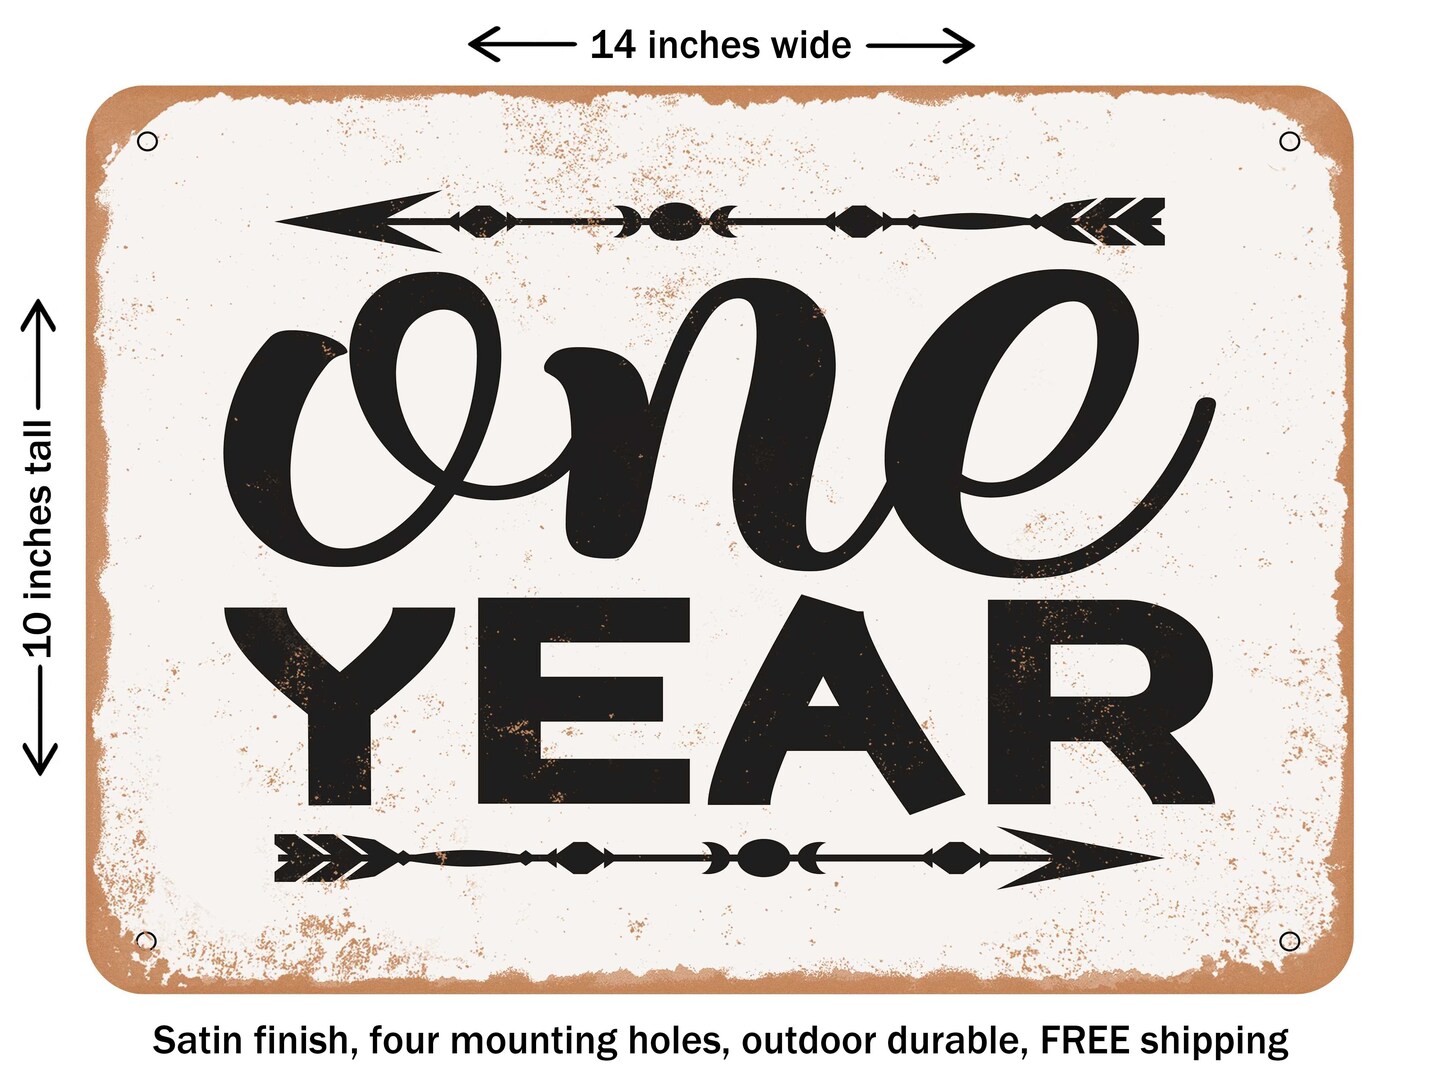 DECORATIVE METAL SIGN - One Year - 2 - Vintage Rusty Look